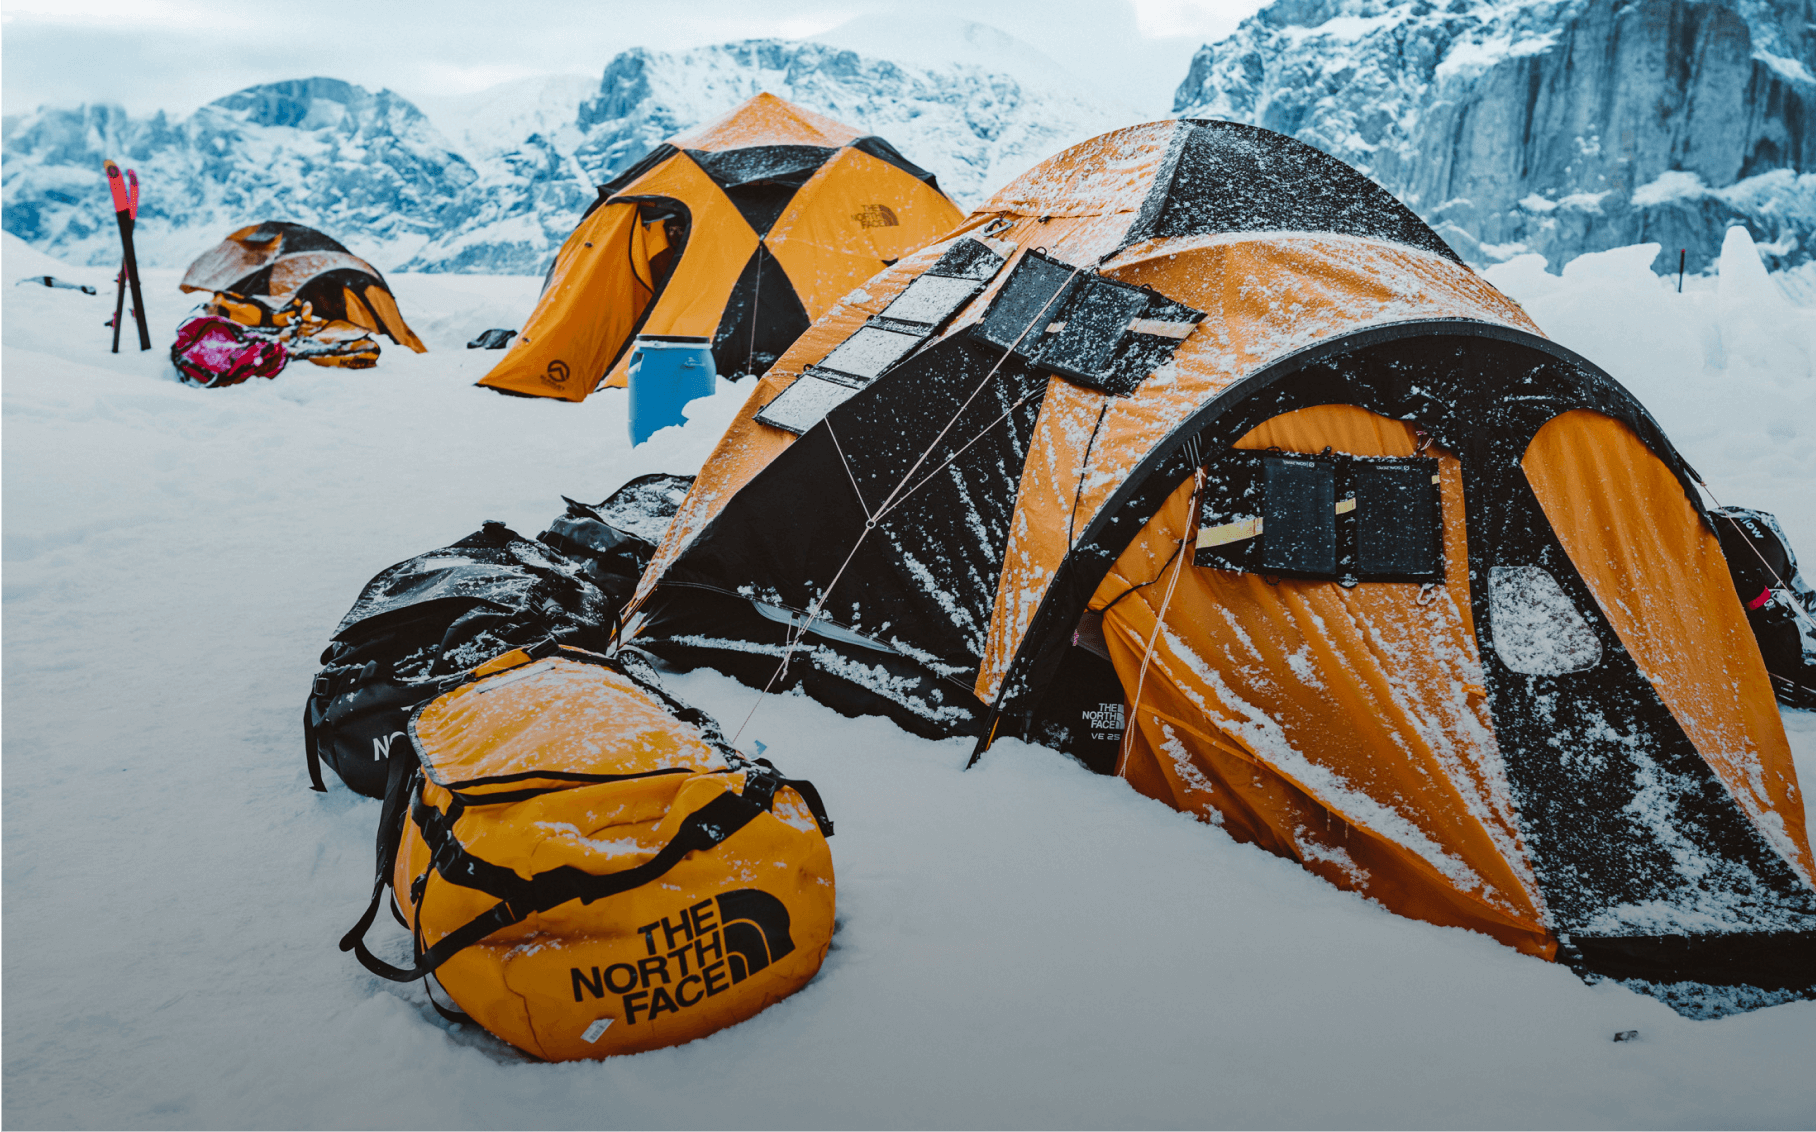 A base camp of tents at the foot of jagged, snowy peaks. 